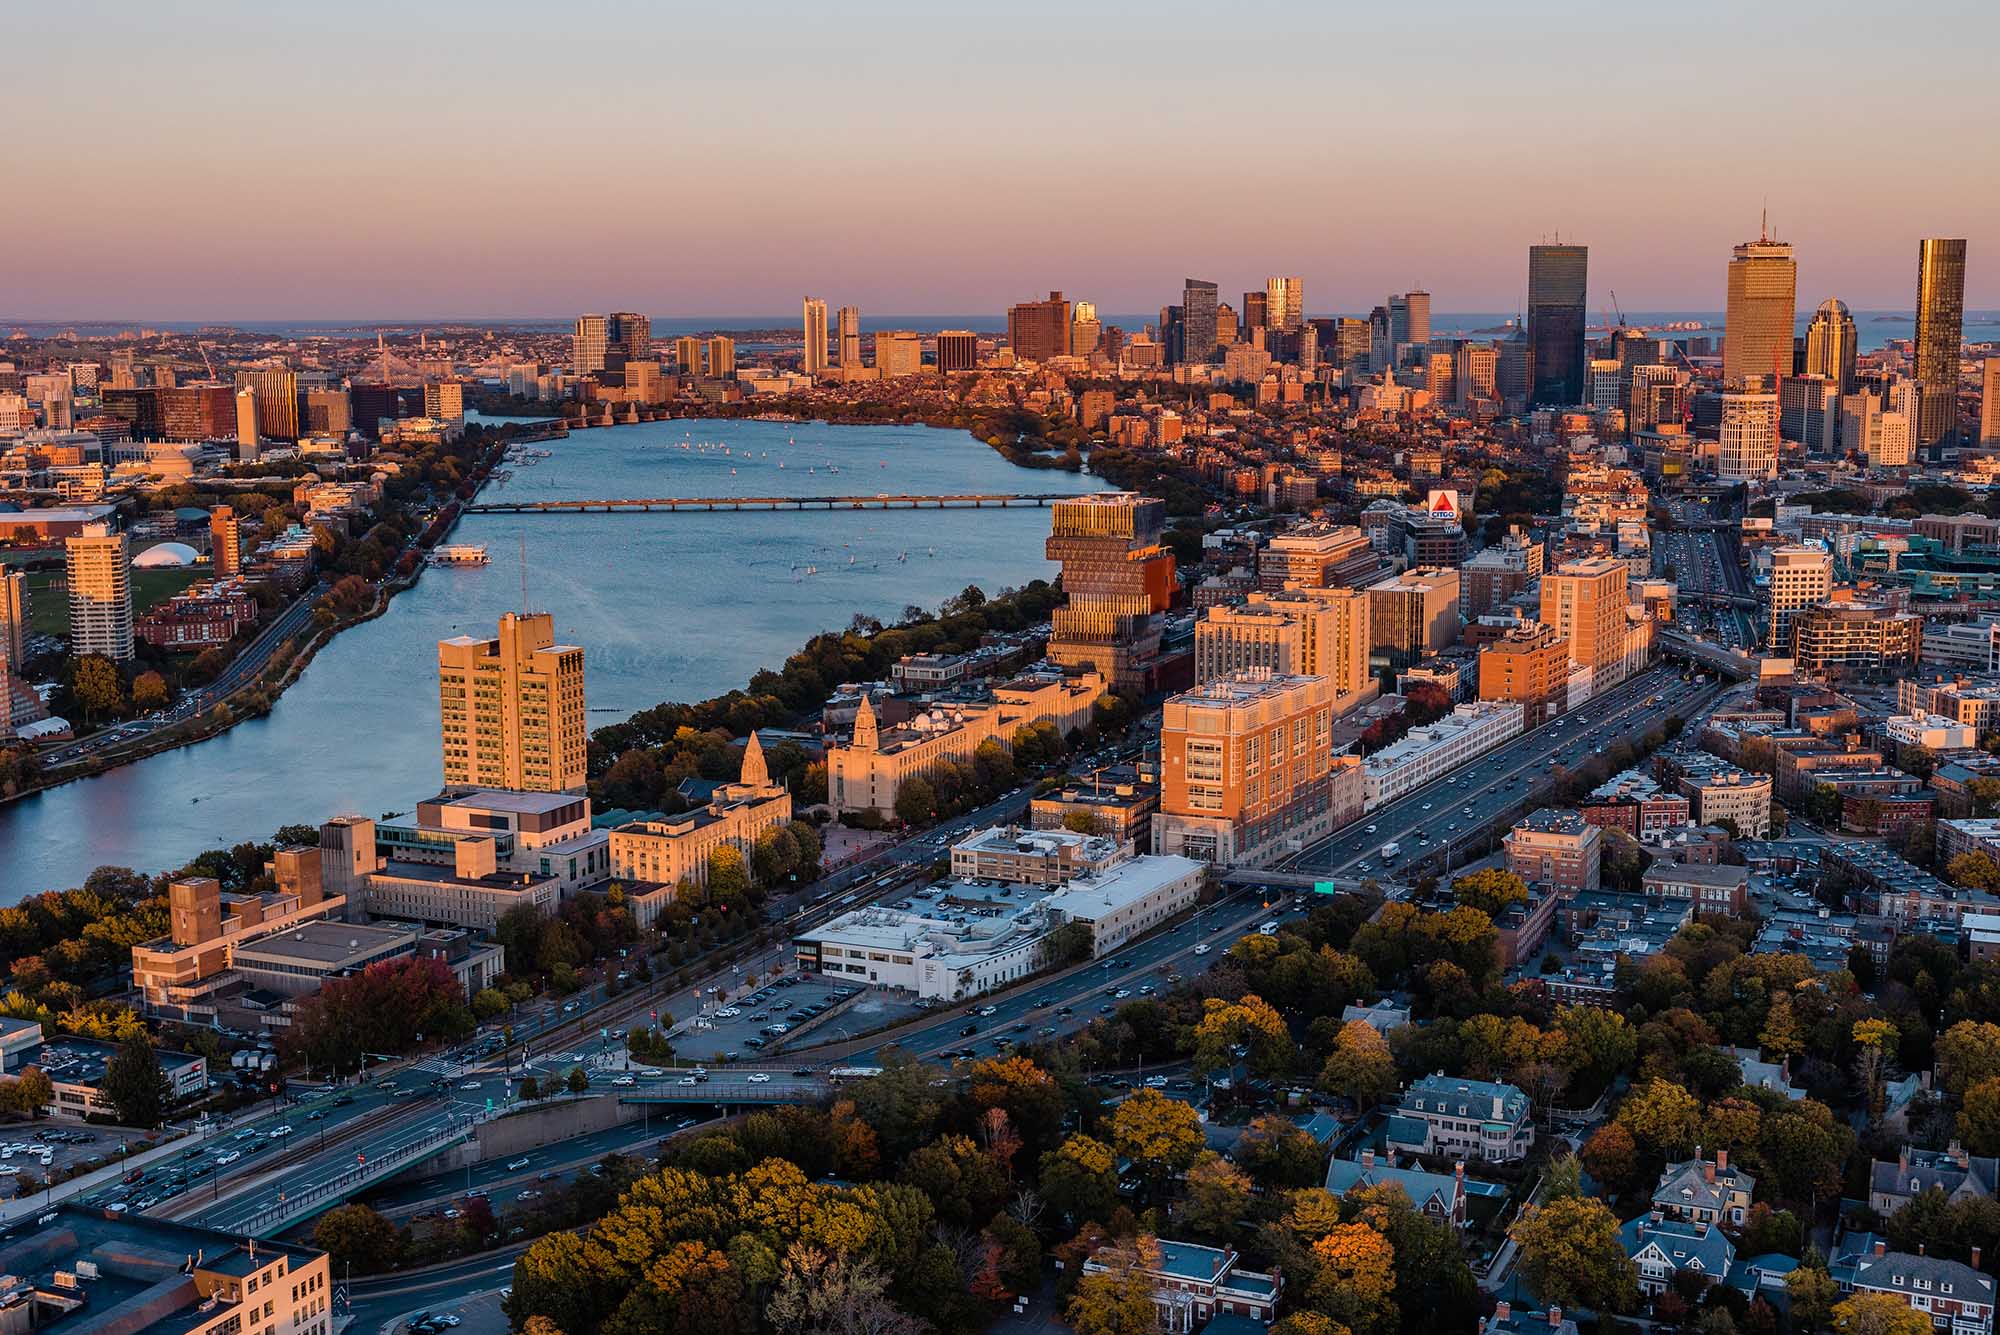  Photo: Aerial shot of Boston University's campus during sunset. An orange glow is shown on the large campus highlighting campus buildings like Kilachand.